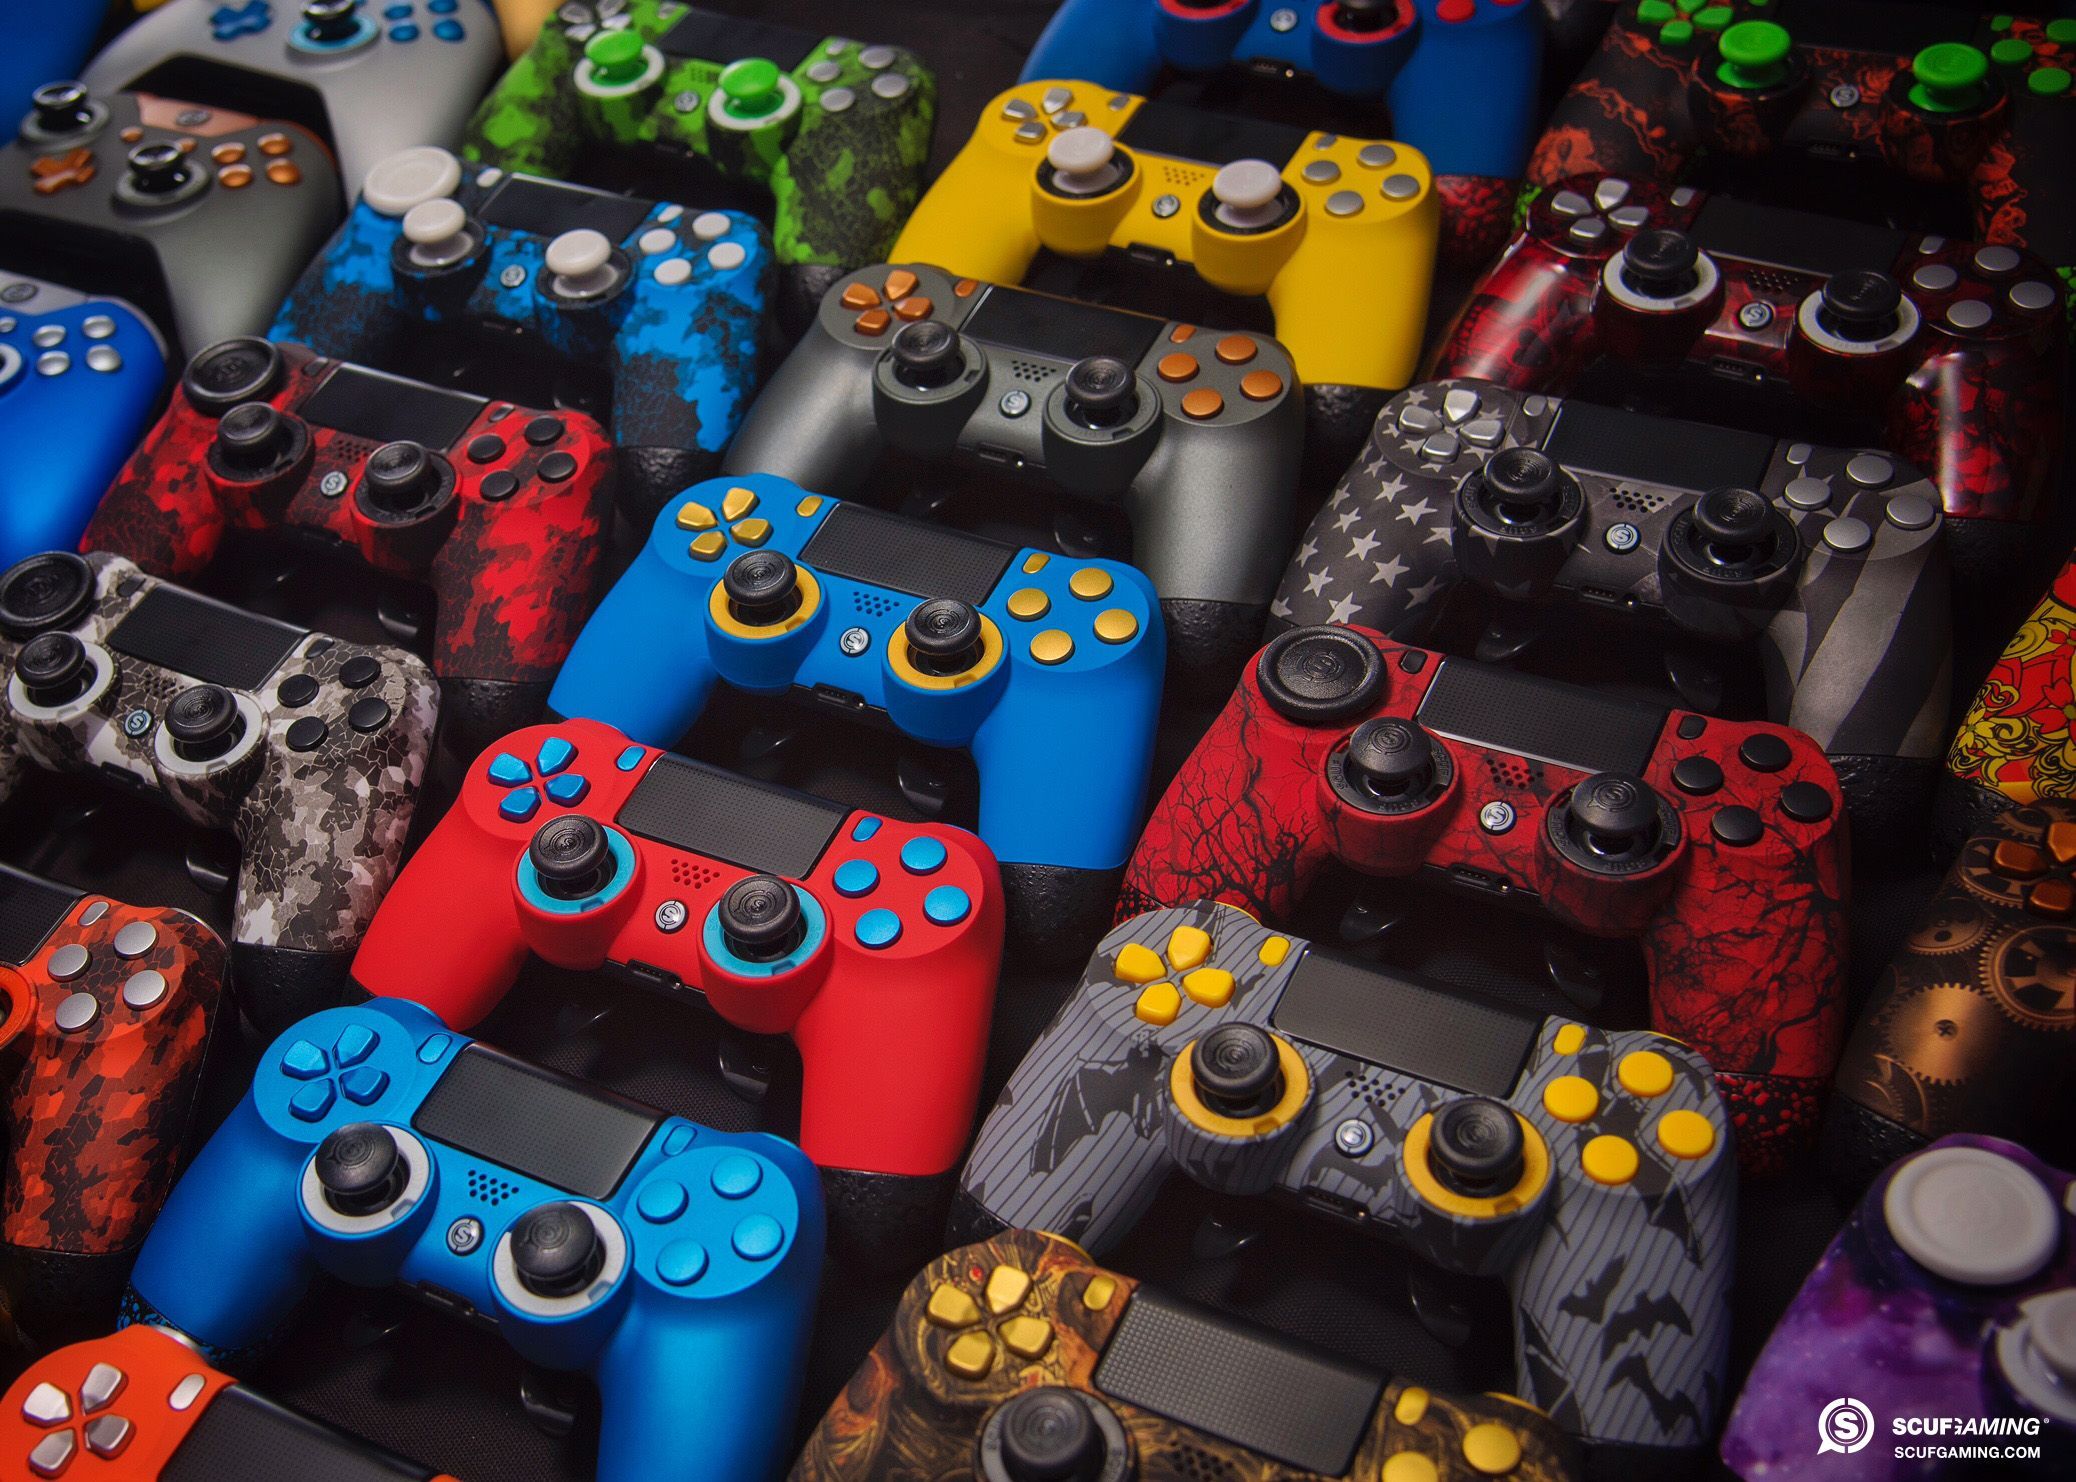 What We Do. Playstation controller, Playstation, Playstation 4 accessories